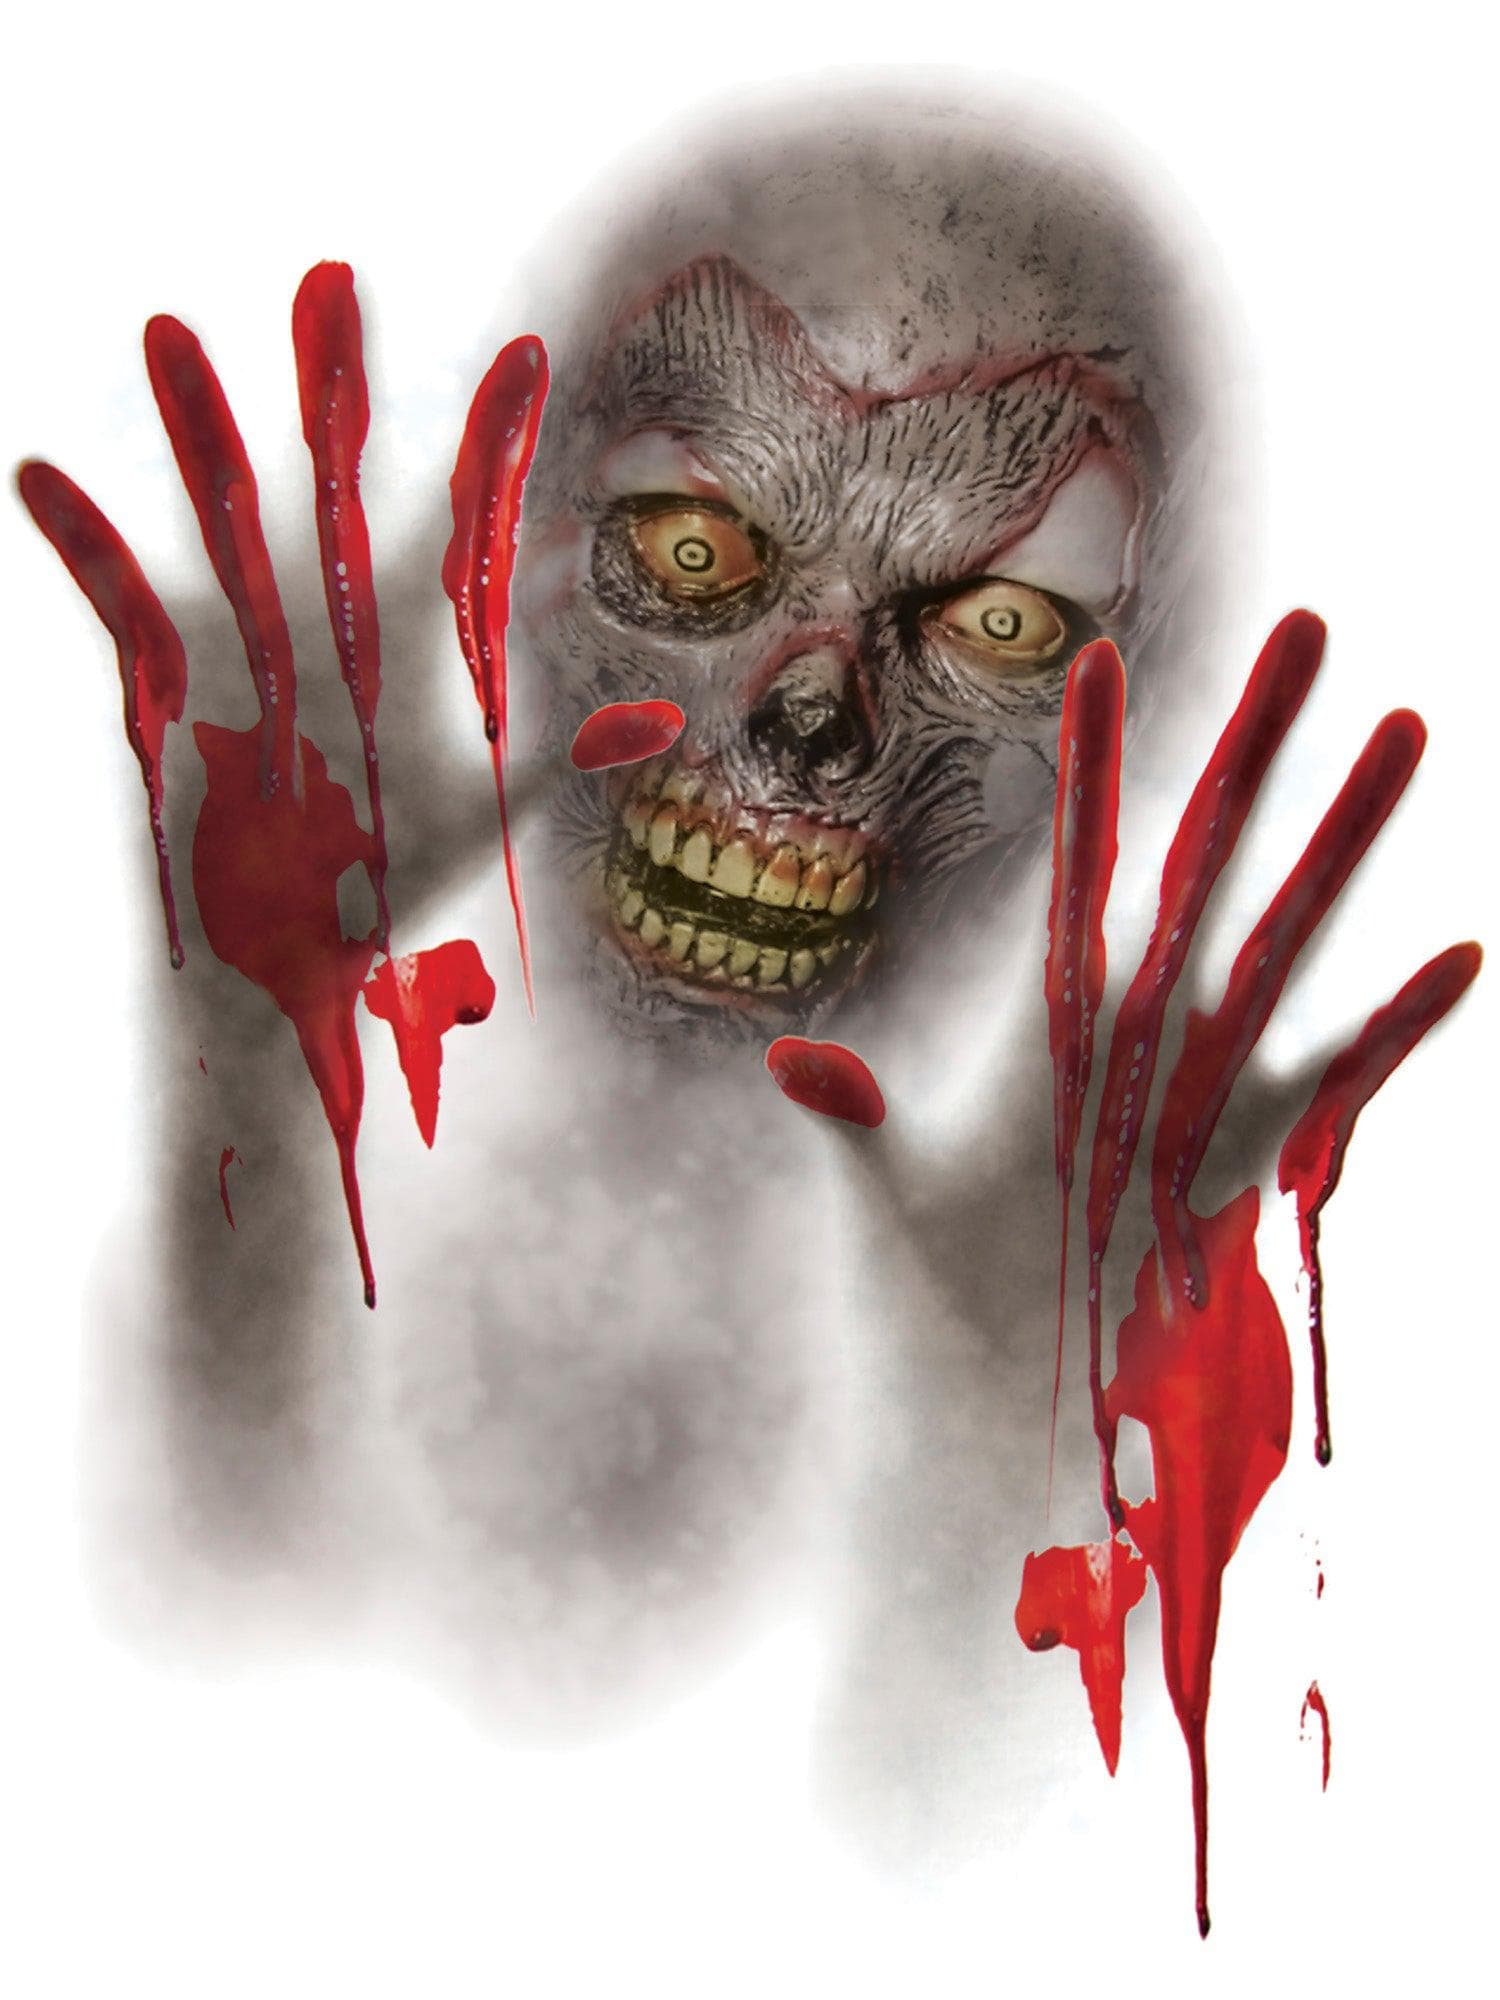 17-inch Bloody Zombie Removable Sticker Window Decoration - costumes.com